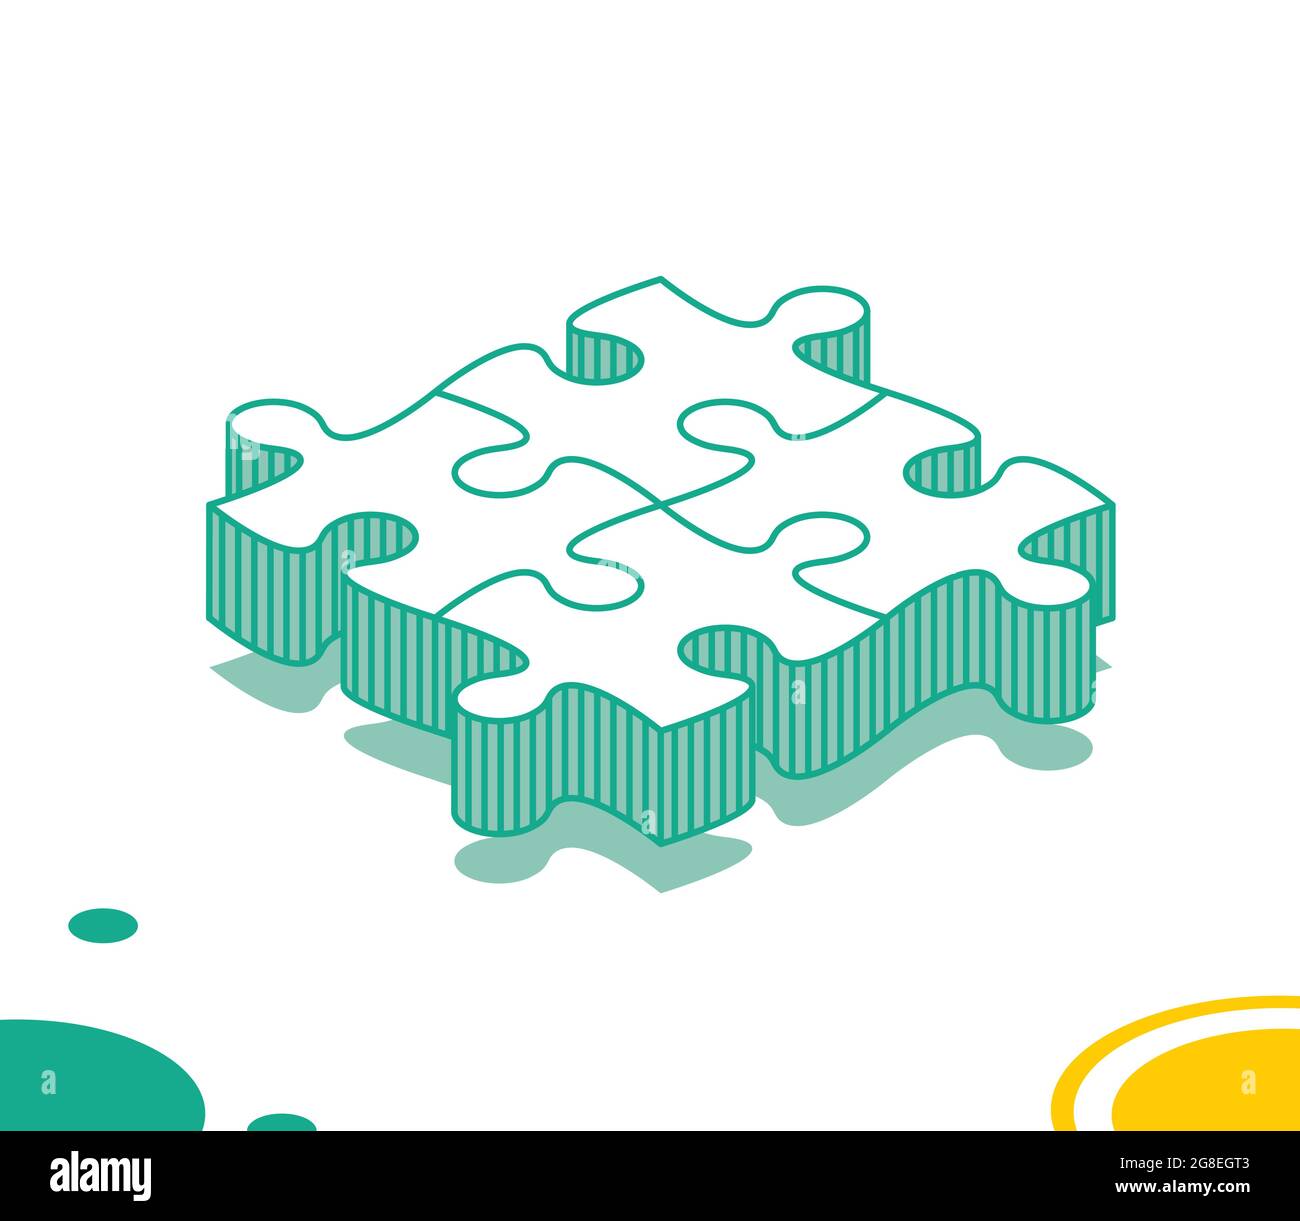 Isometric Puzzle on White Background. Four Puzzle Pieces. Outline Teamwork or Cooperation Concept. Vector Illustration. Stock Vector